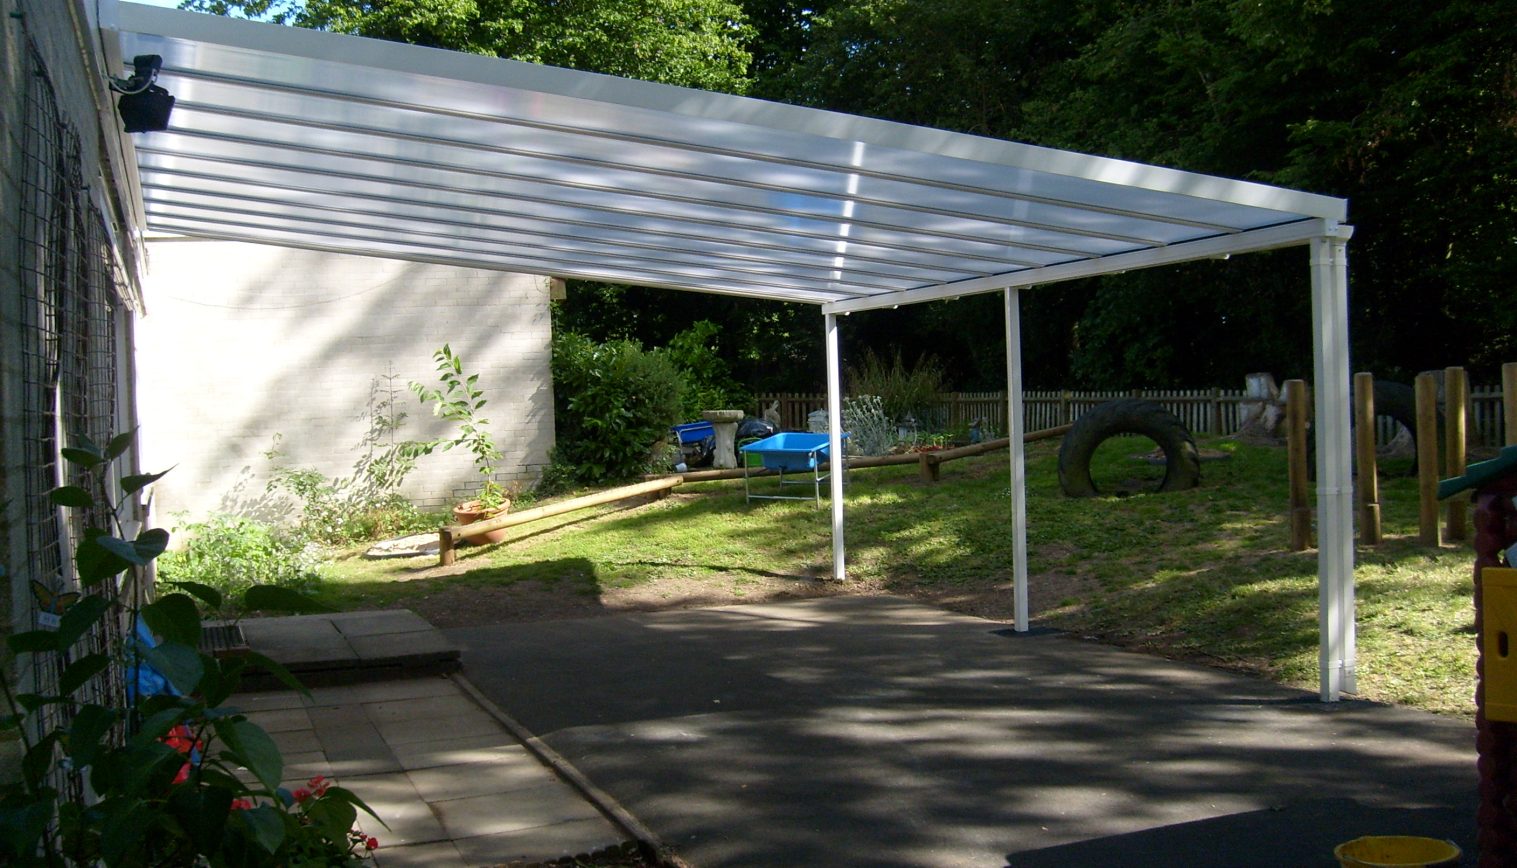 Hartley Primary School – Wall mounted canopy